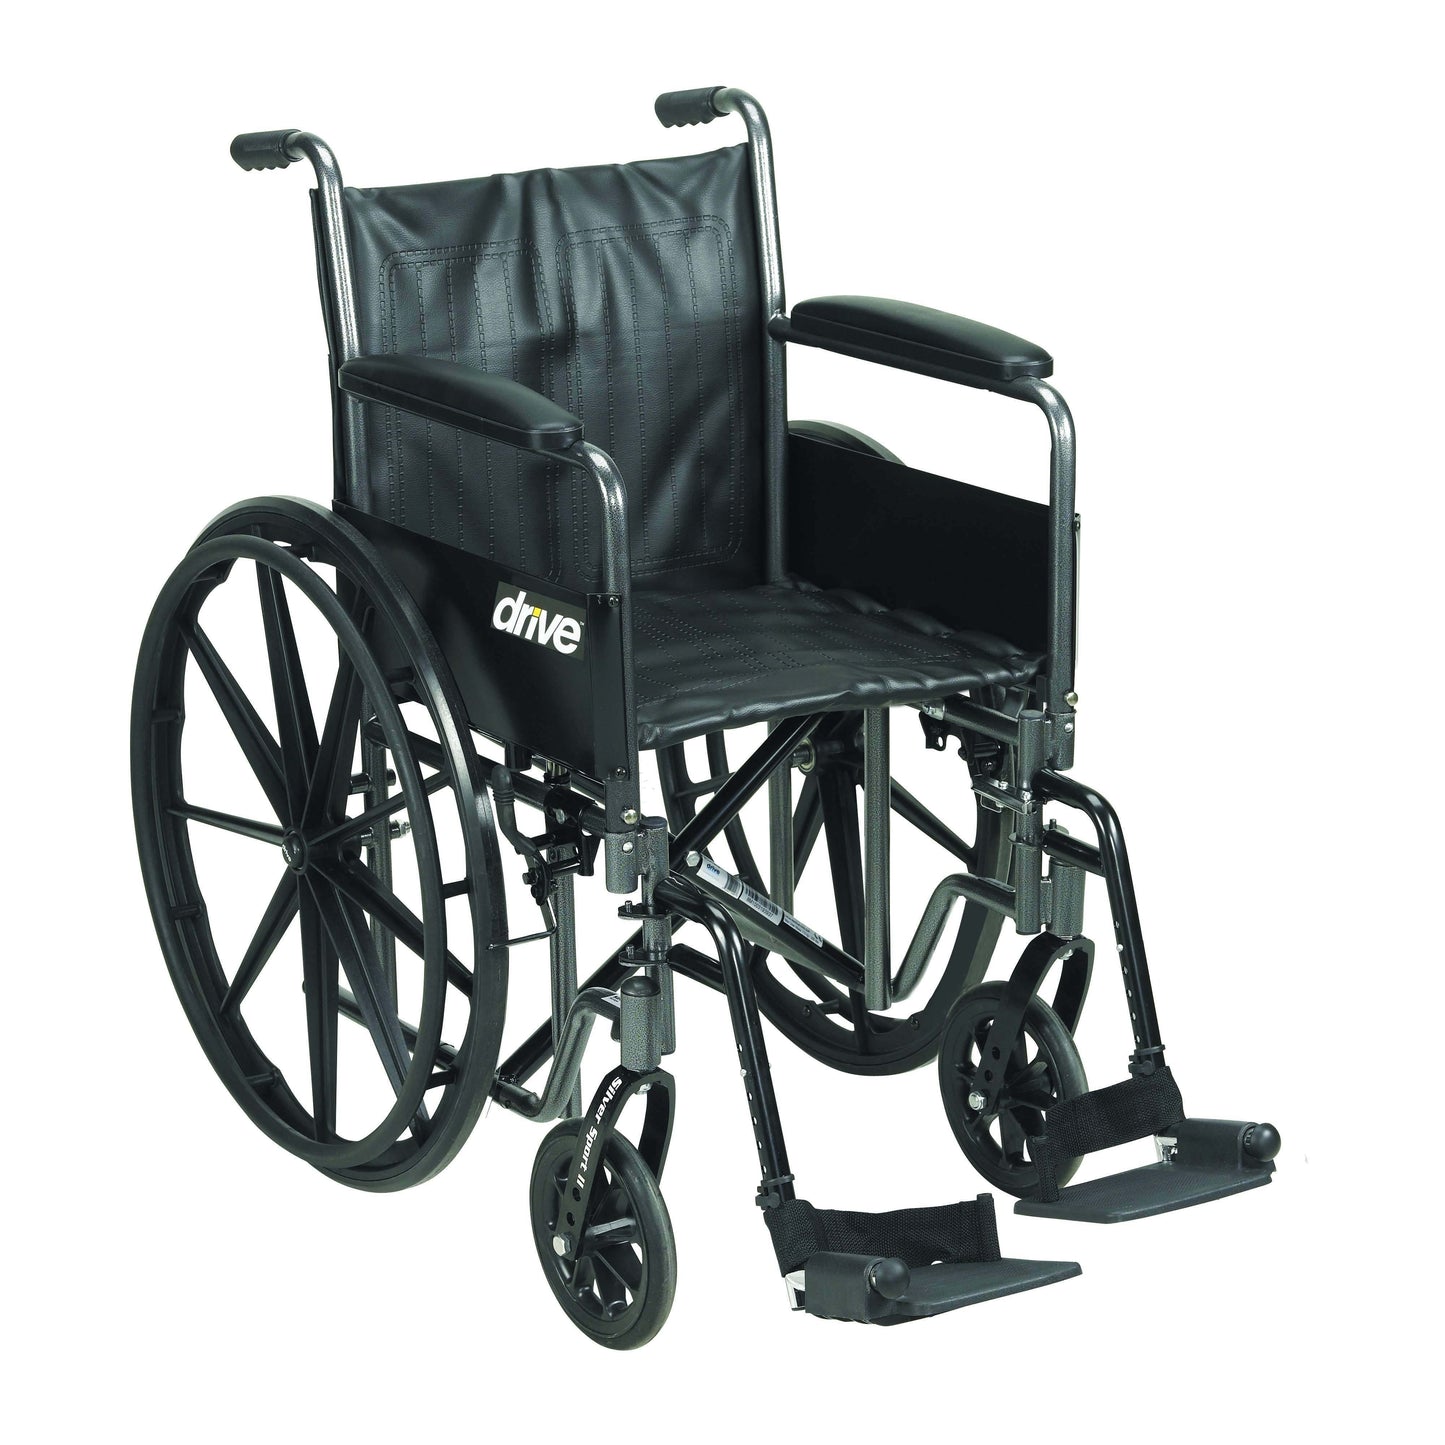 Drive ssp216dfa-sf Silver Sport 2 Wheelchair, Detachable Full Arms, Swing away Footrests, 16" Seat